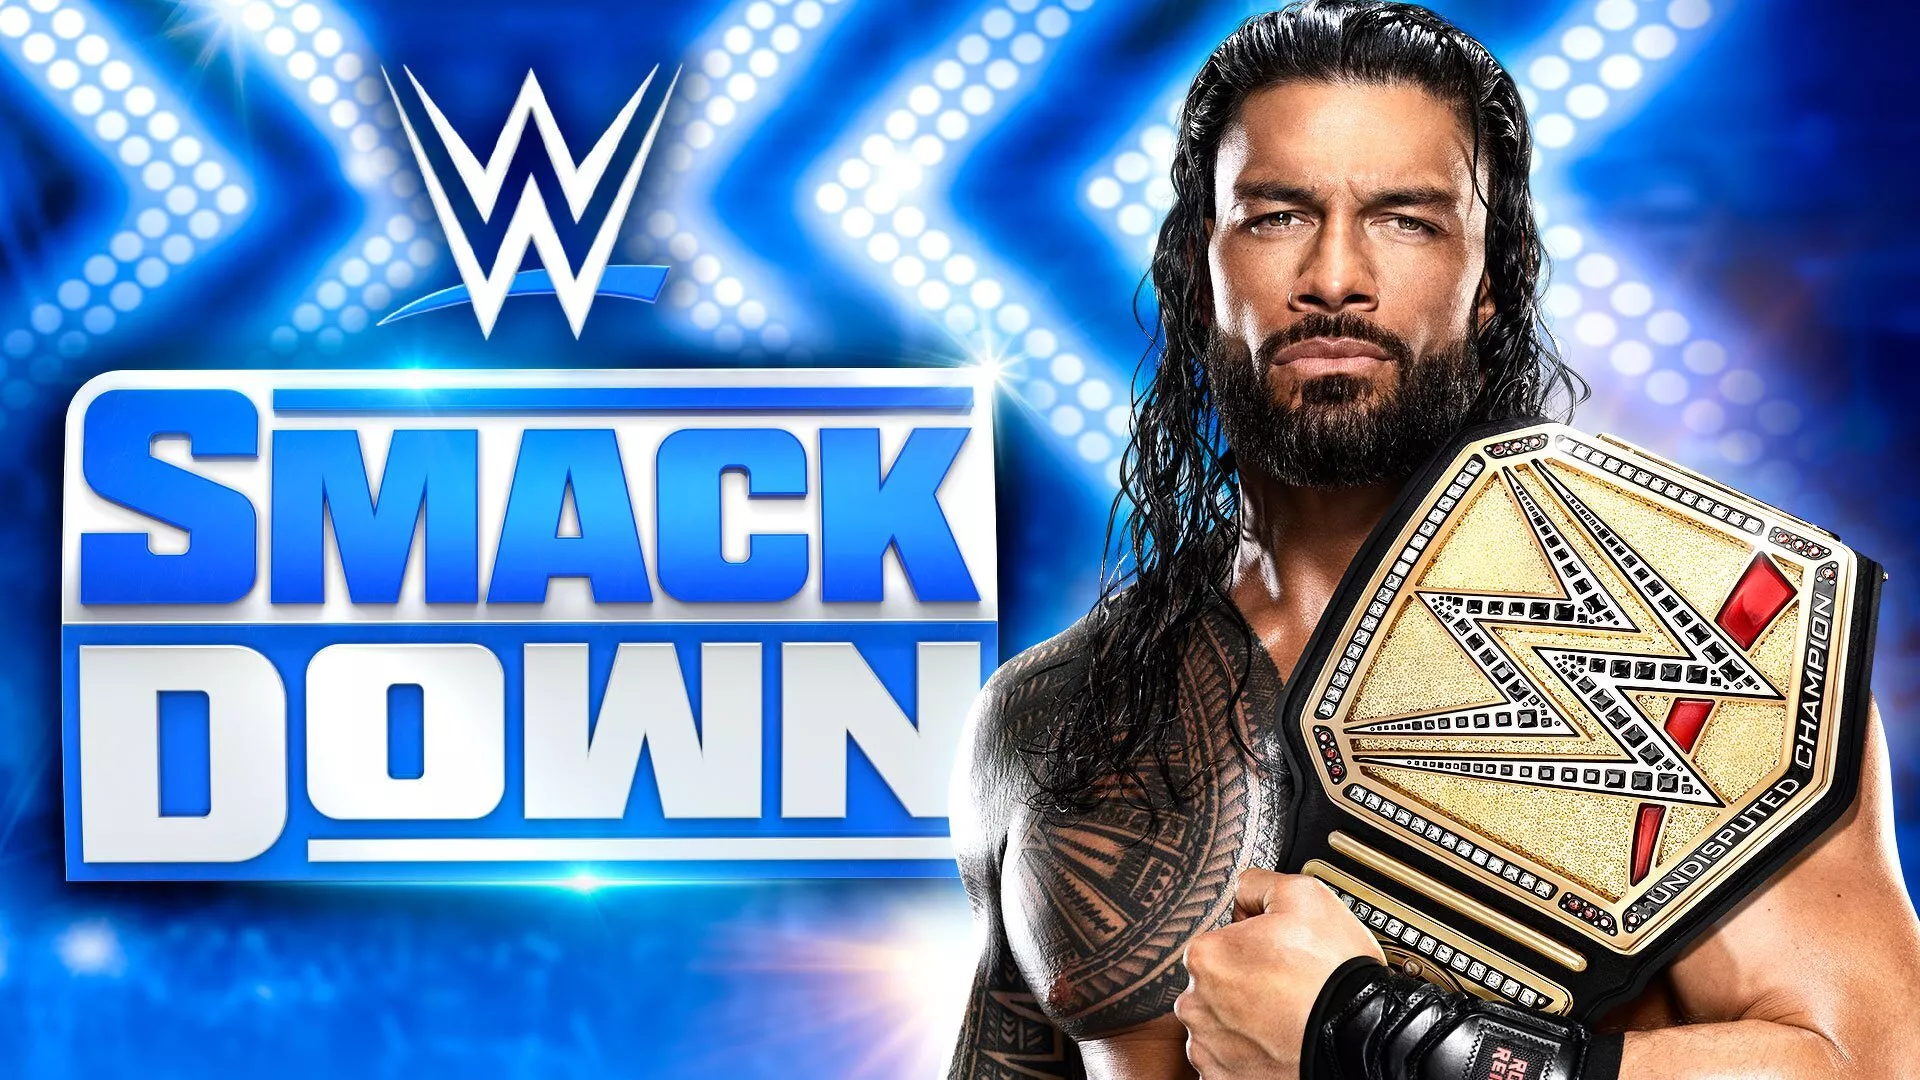 Roman Reigns announced for WWE SmackDown shows in December & January